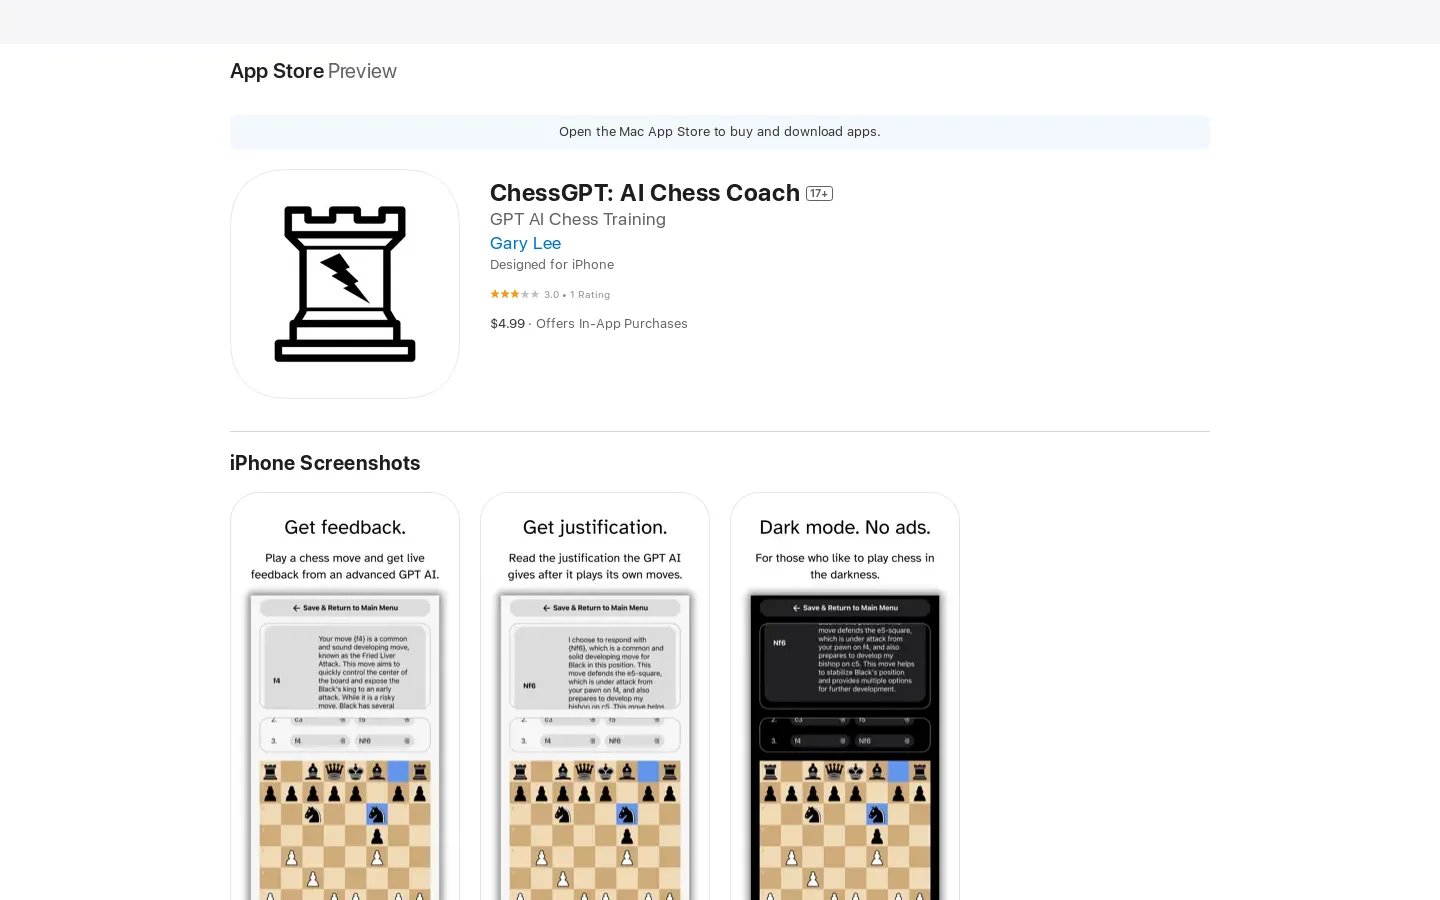 ChessGPT: AI Chess Coach on the App Store